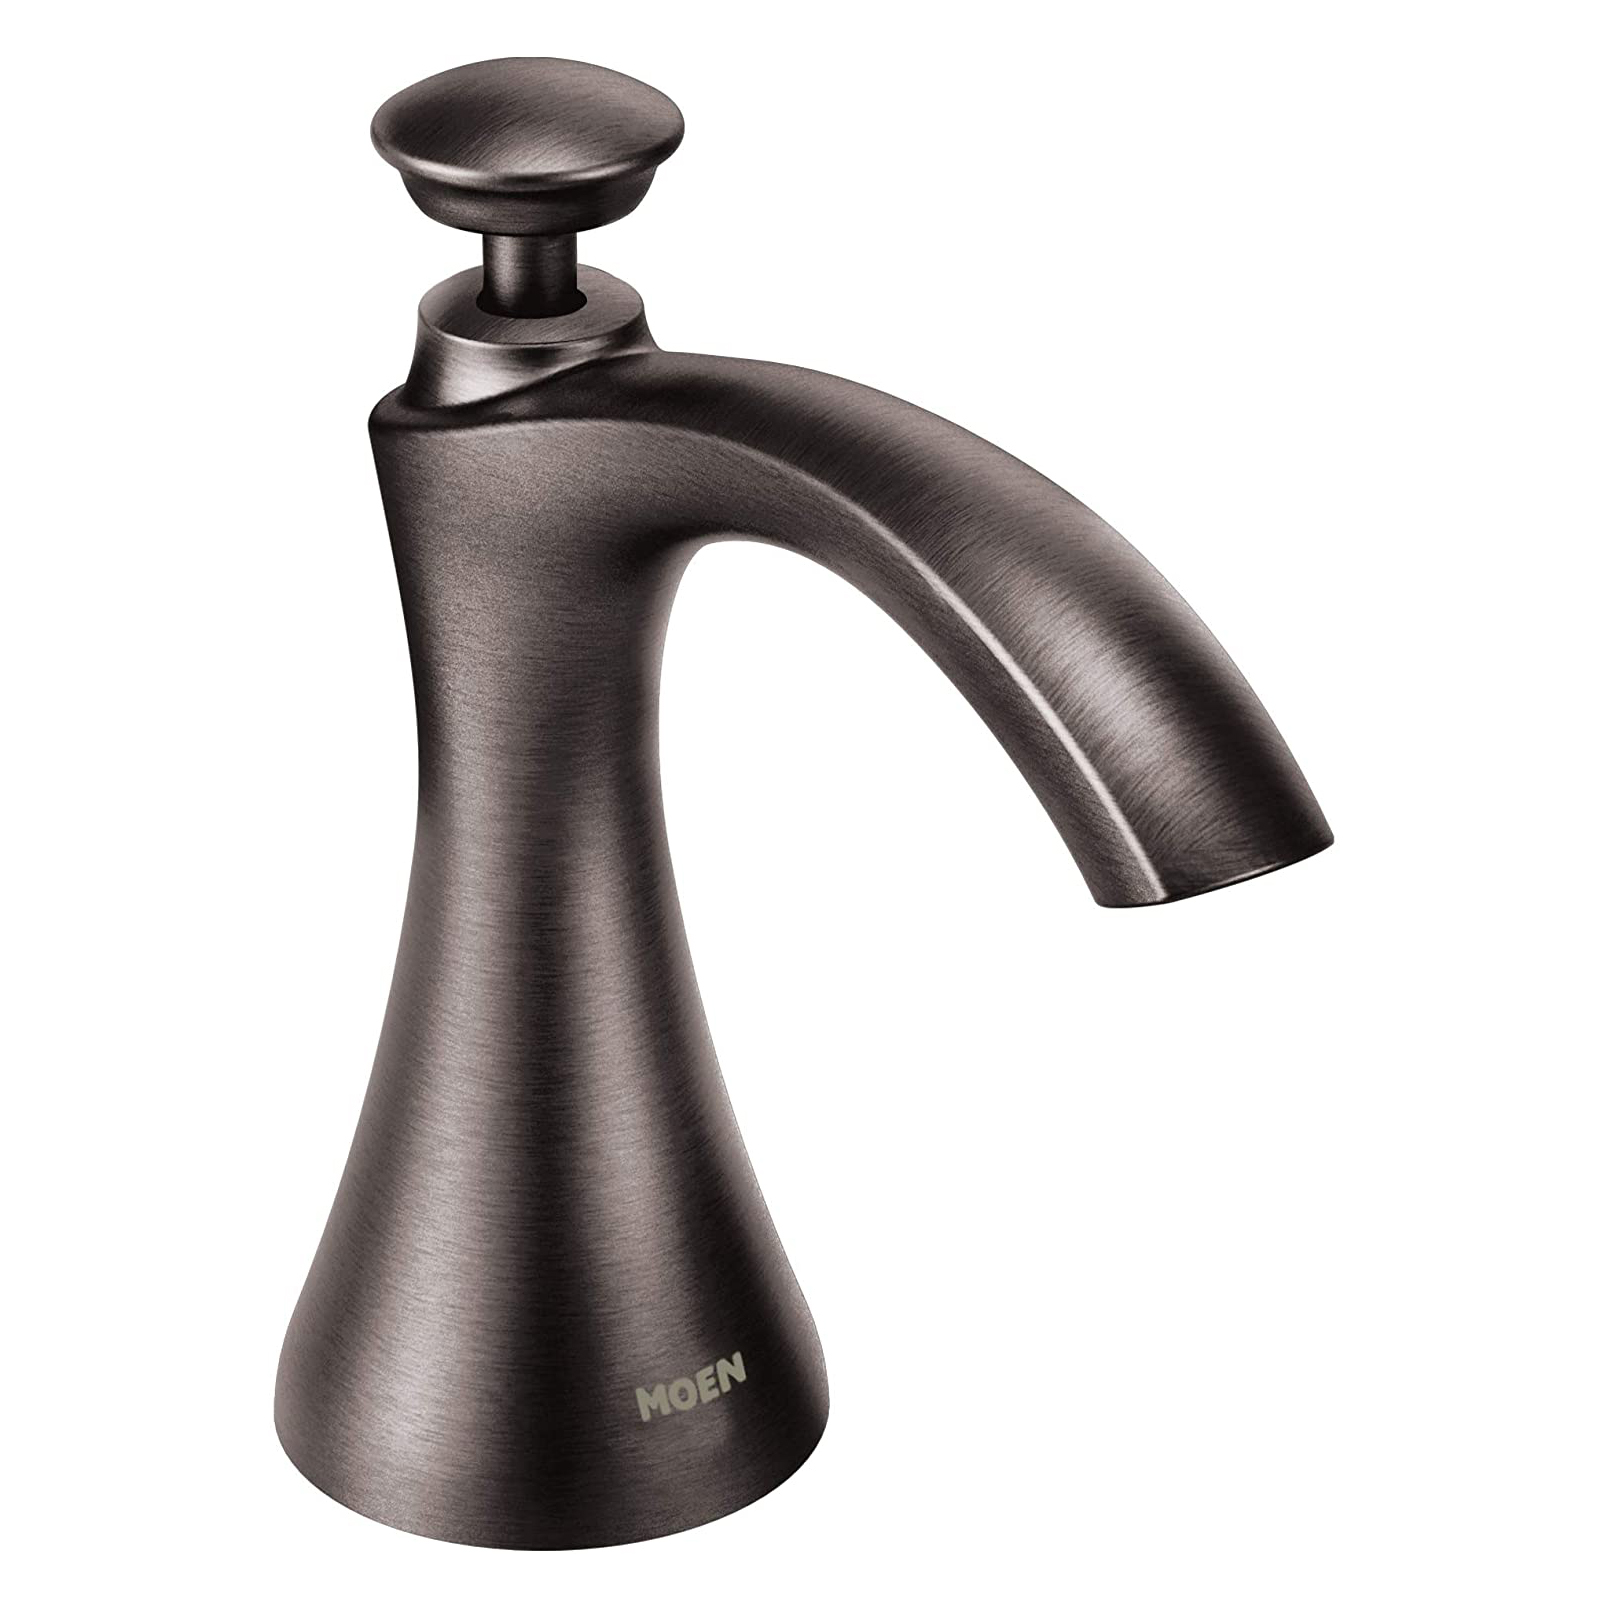 Transitional Soap/Lotion Dispenser in Black Stainless